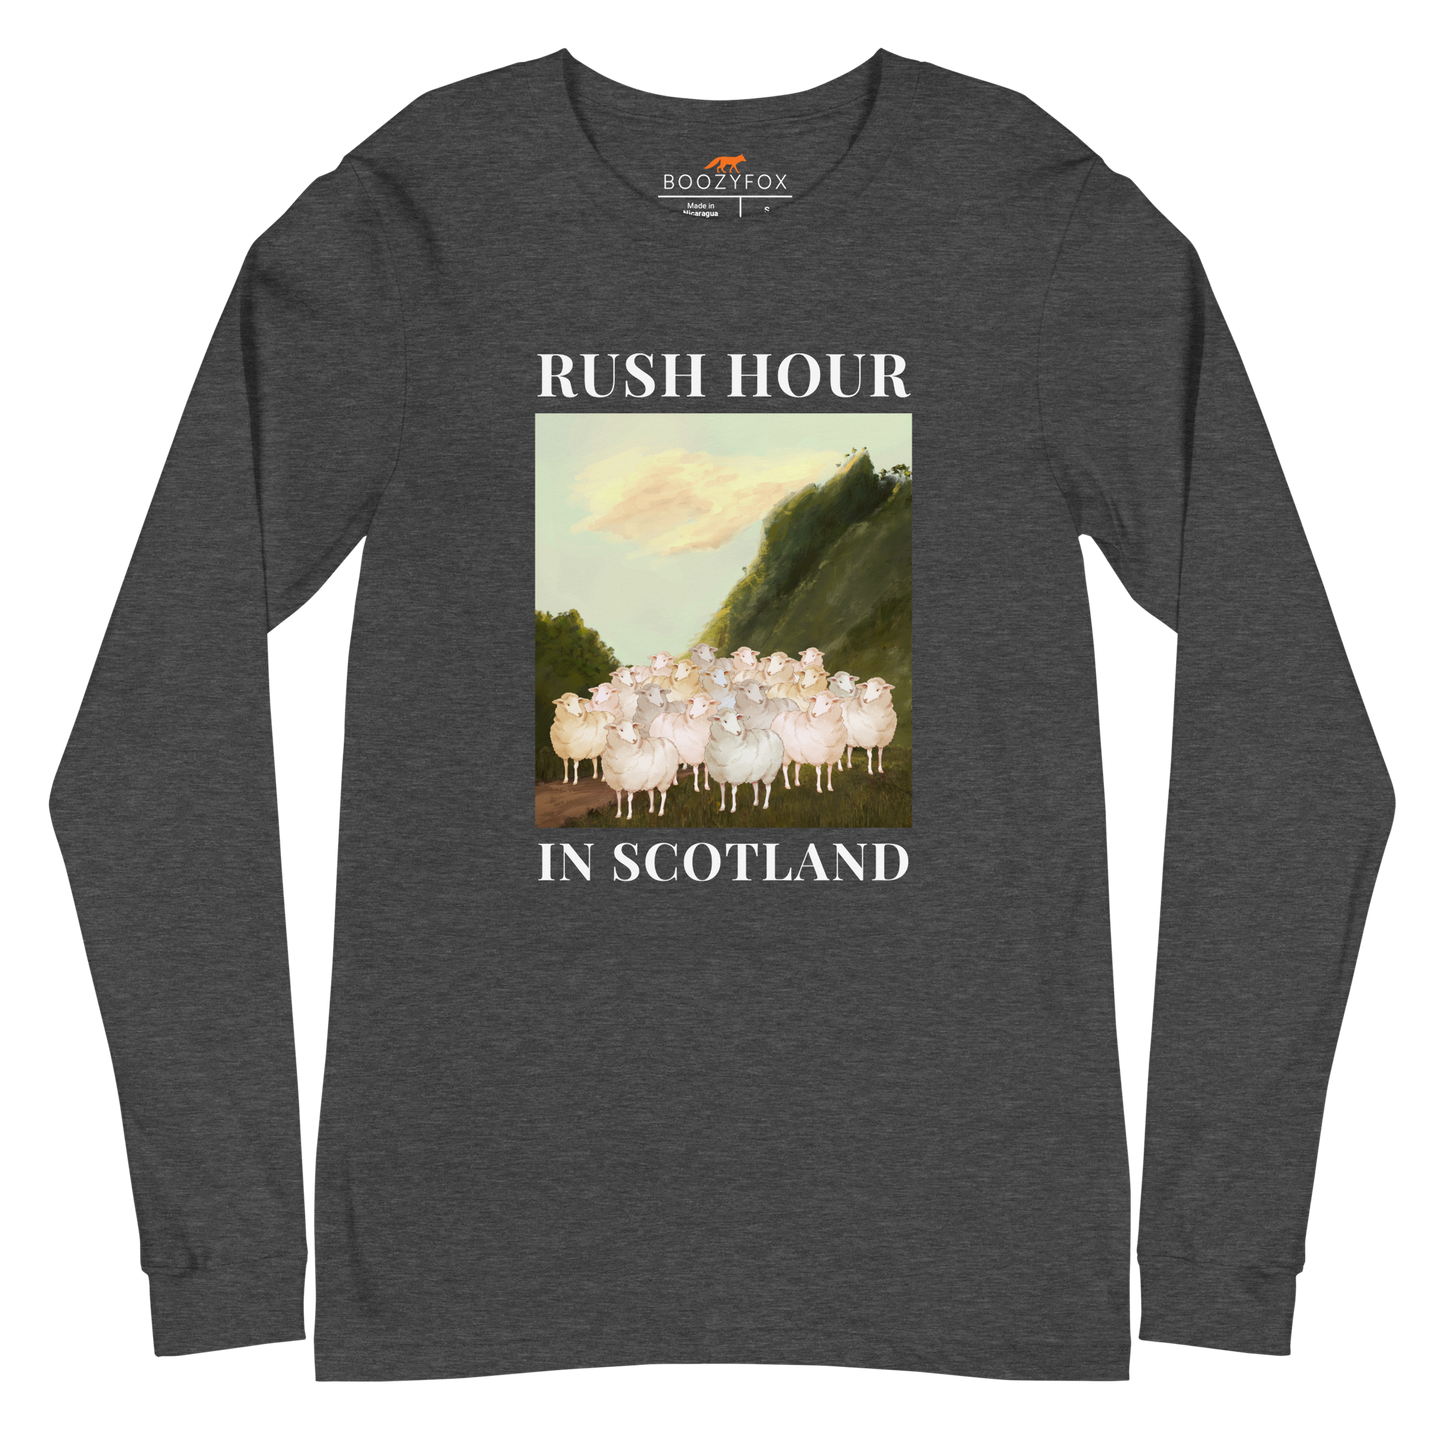 Dark Grey Heather Sheep Long Sleeve Tee featuring a comical Rush Hour In Scotland graphic on the chest - Artsy/Funny Sheep Long Sleeve Graphic Tees - Boozy Fox